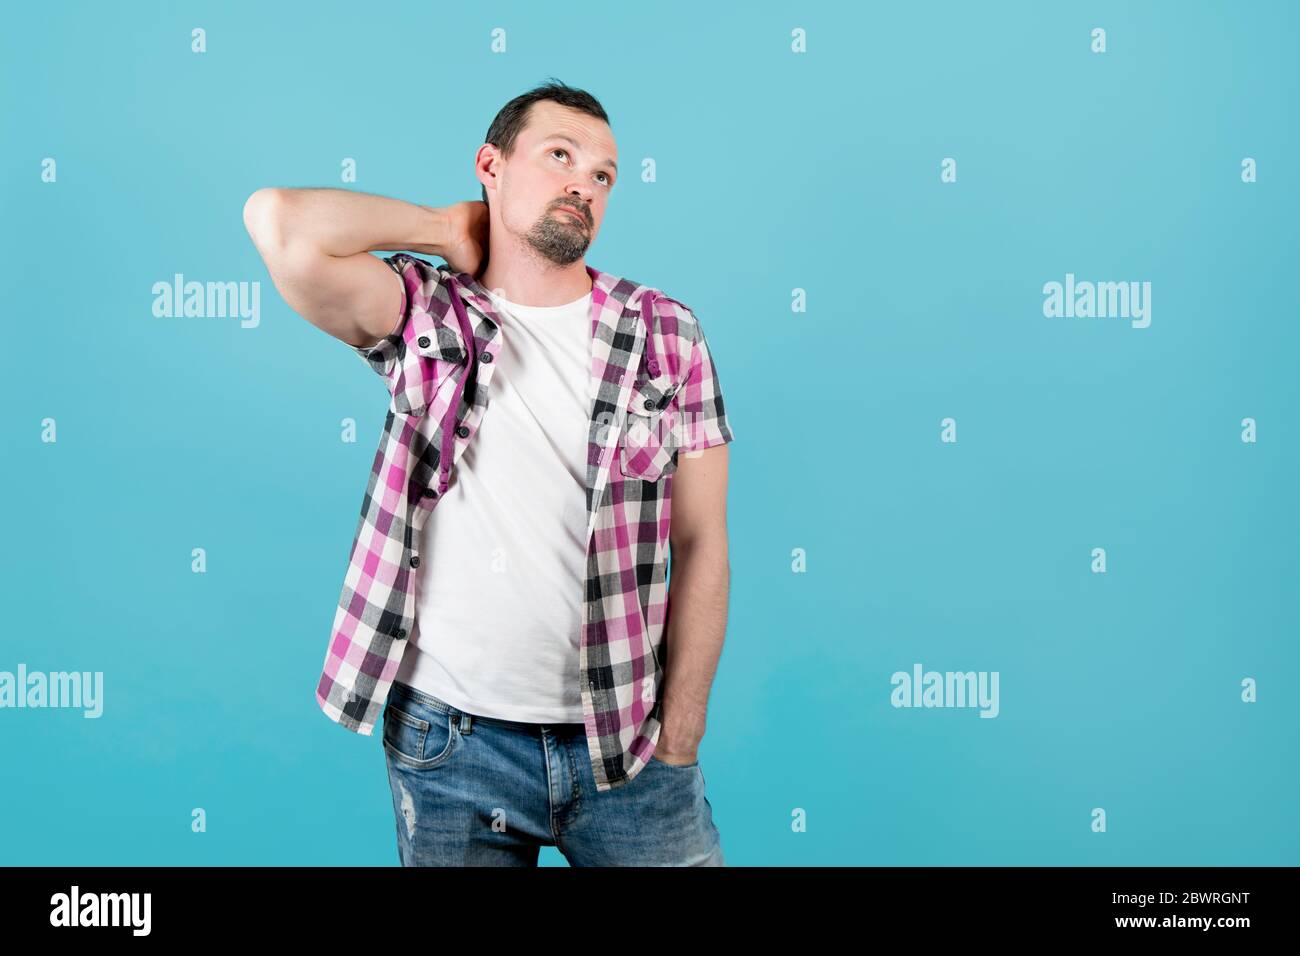 a man in a plaid shirt rubs his neck and looks up thoughtfully Stock Photo